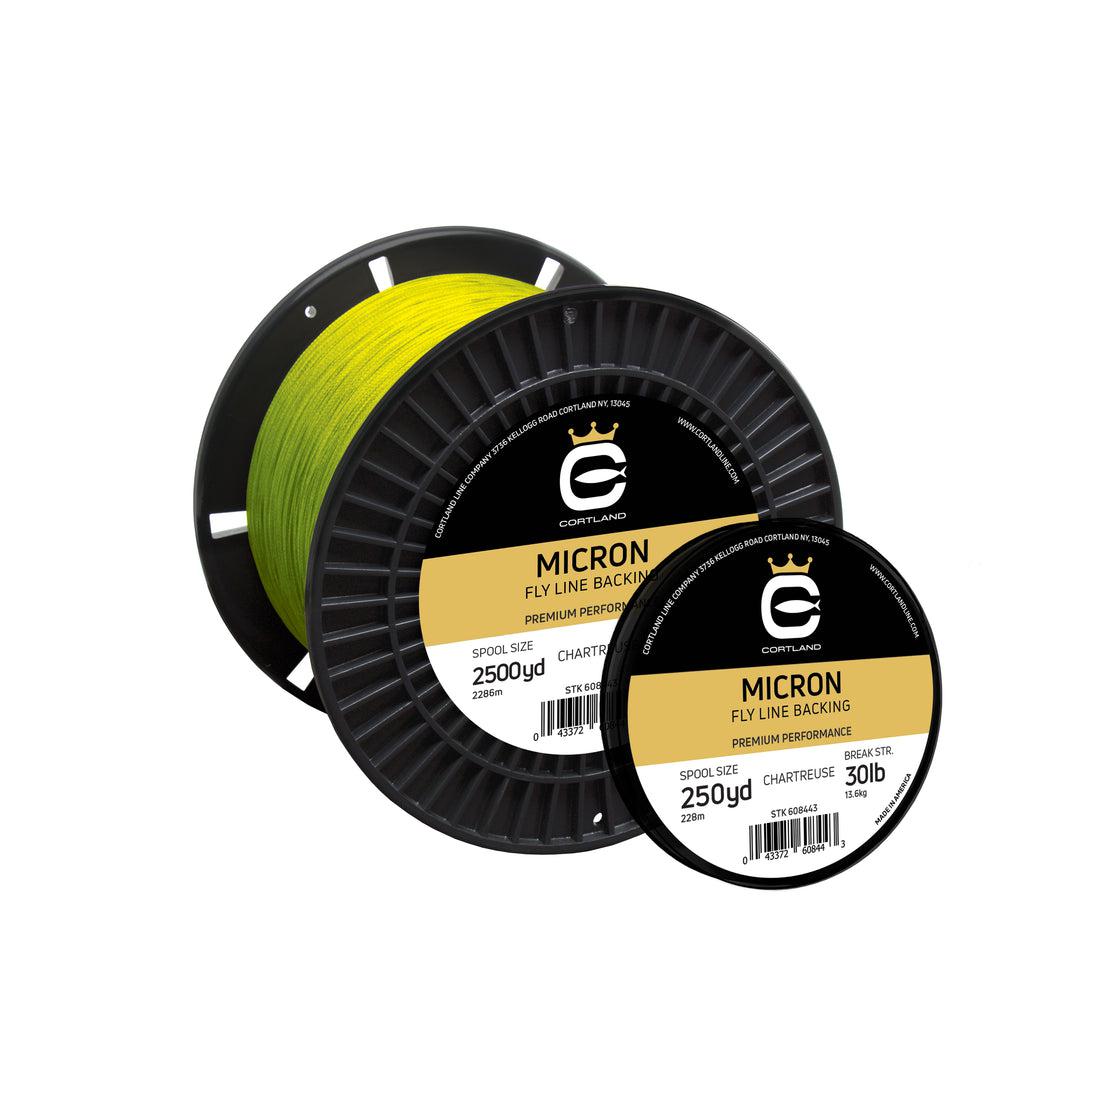 Cortland Micron Fly Line Backing 30 lb 250 yds Chartreuse Fly Line Backing